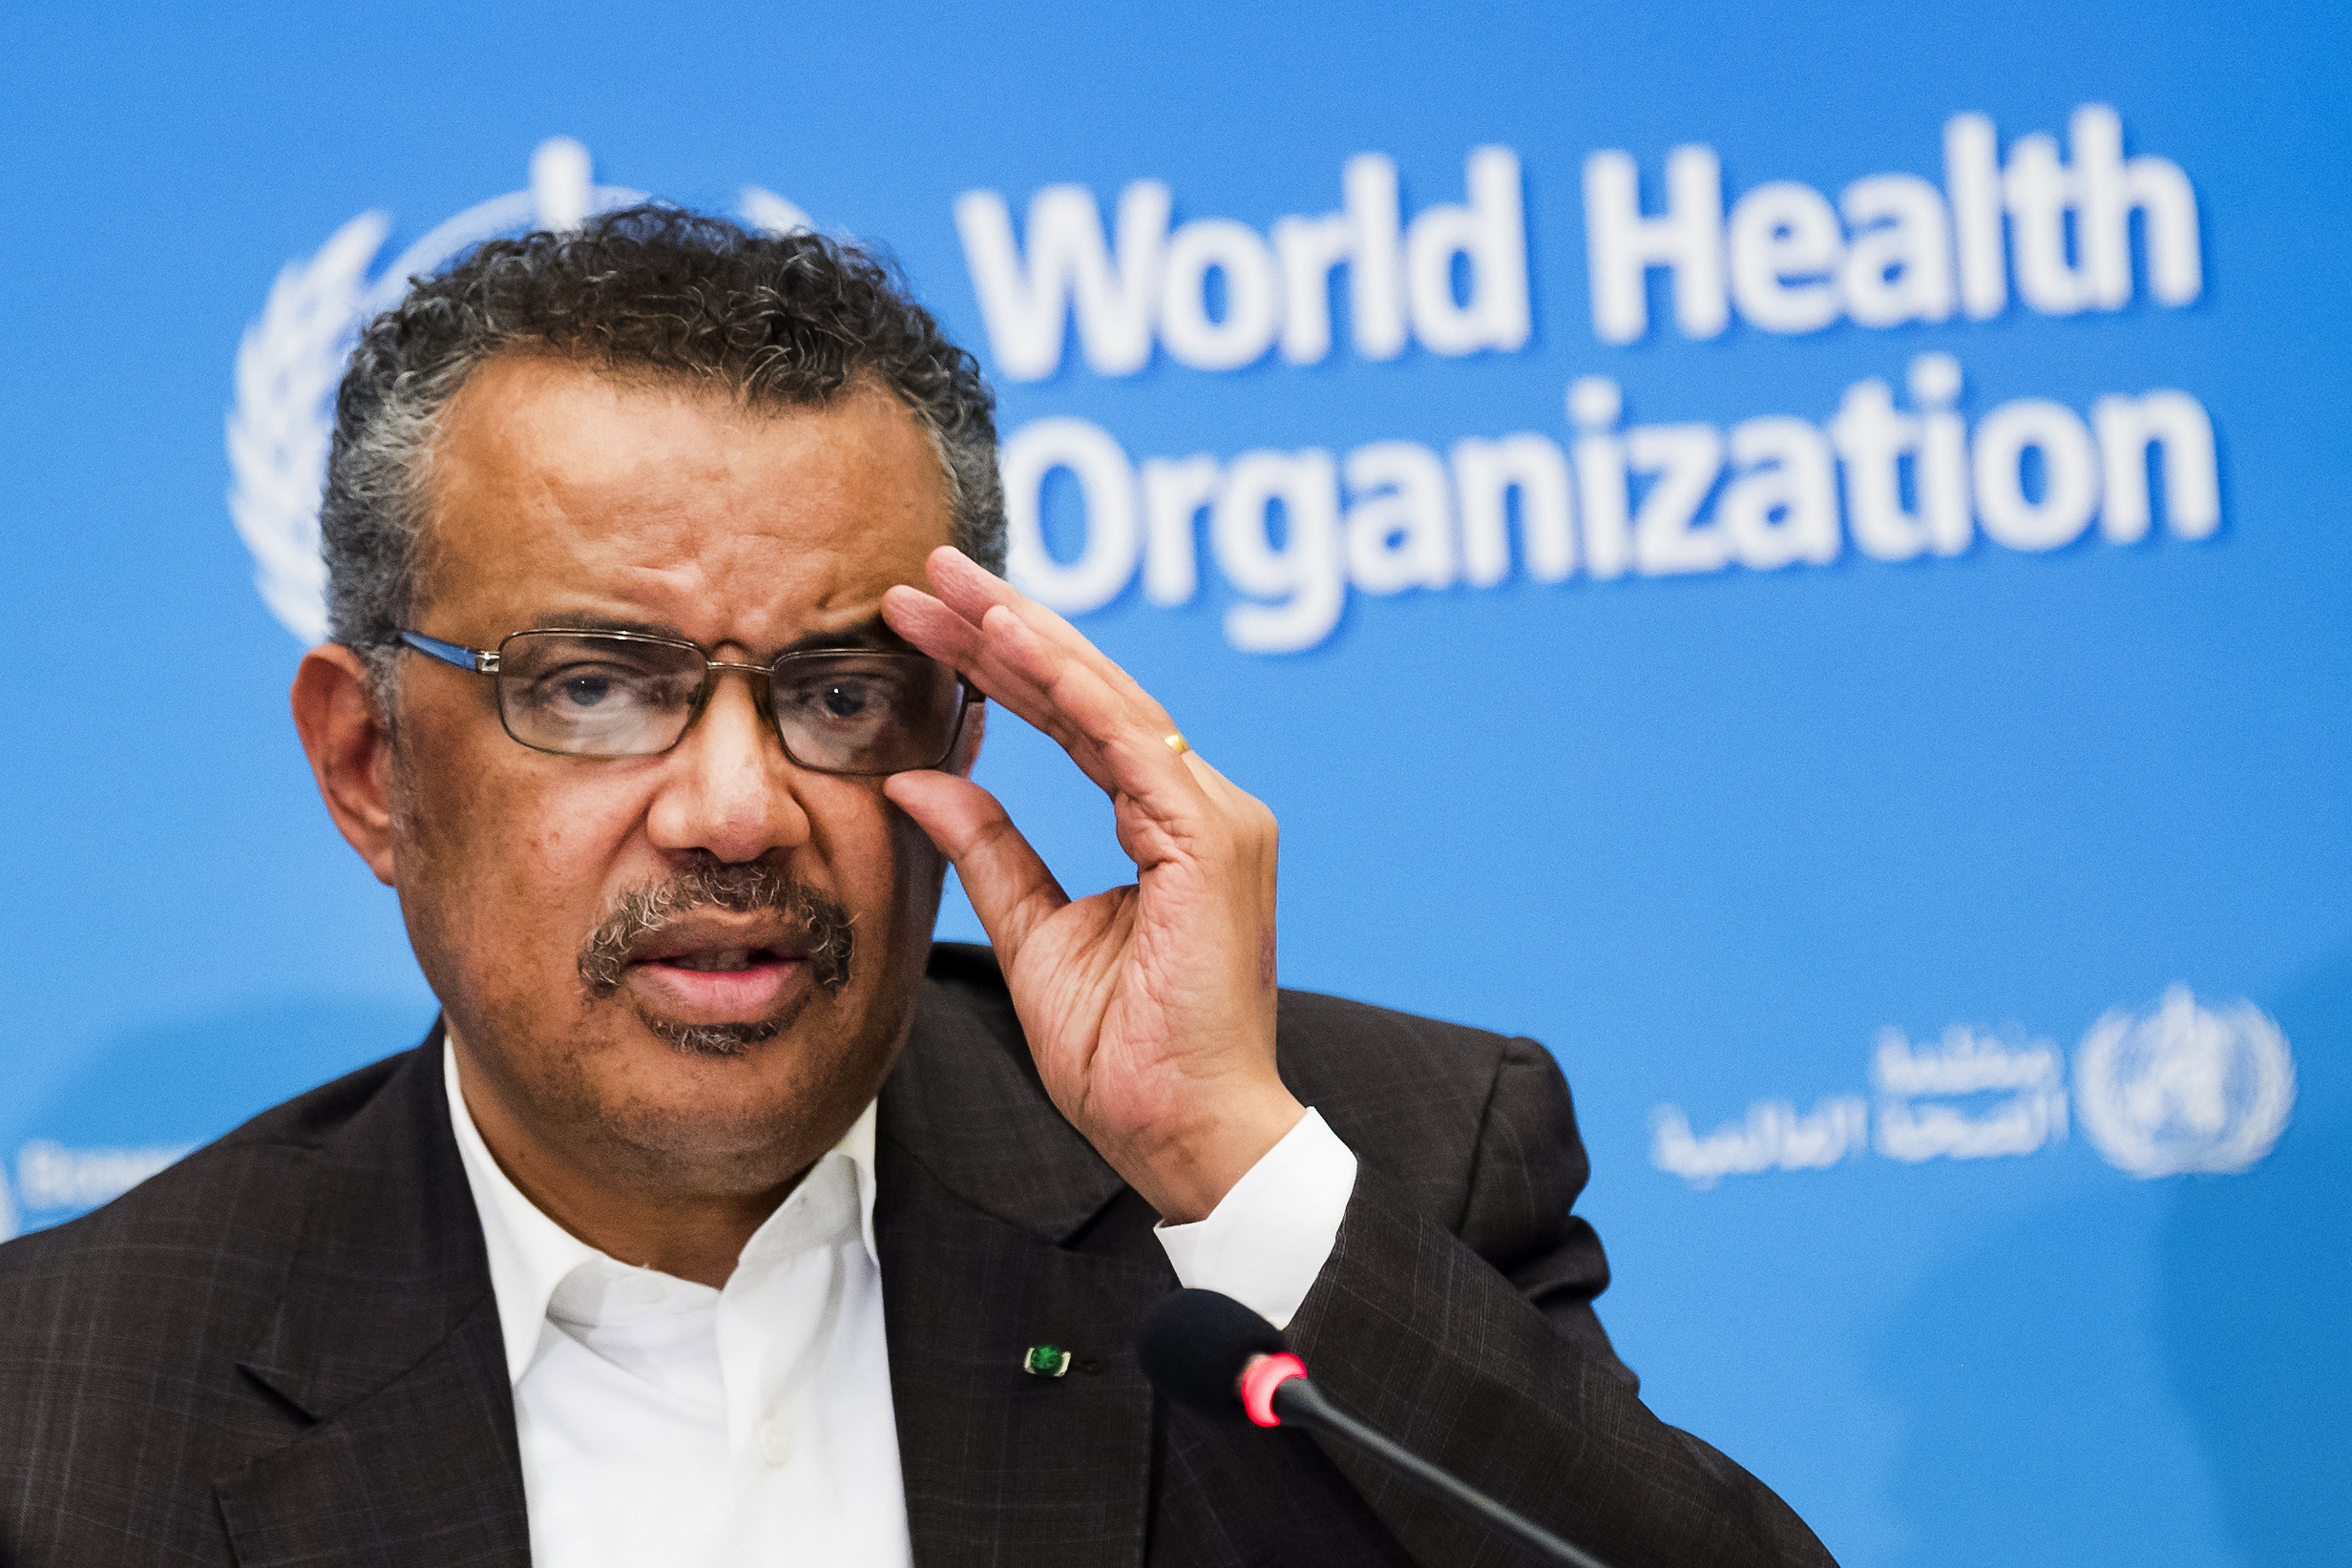 FILE- In this Jan. 30, 2020, file photo, Tedros Adhanom Ghebreyesus, Director General of the World Health Organization (WHO), talks to the media at the World Health Organization headquarters in Geneva, Switzerland. China said Monday, Jan. 11, 2021, that a group of experts from the World Health Organization are due to arrive this week for an investigation into the origins of the coronavirus pandemic. (Jean-Christophe Bott/Keystone via AP, File)